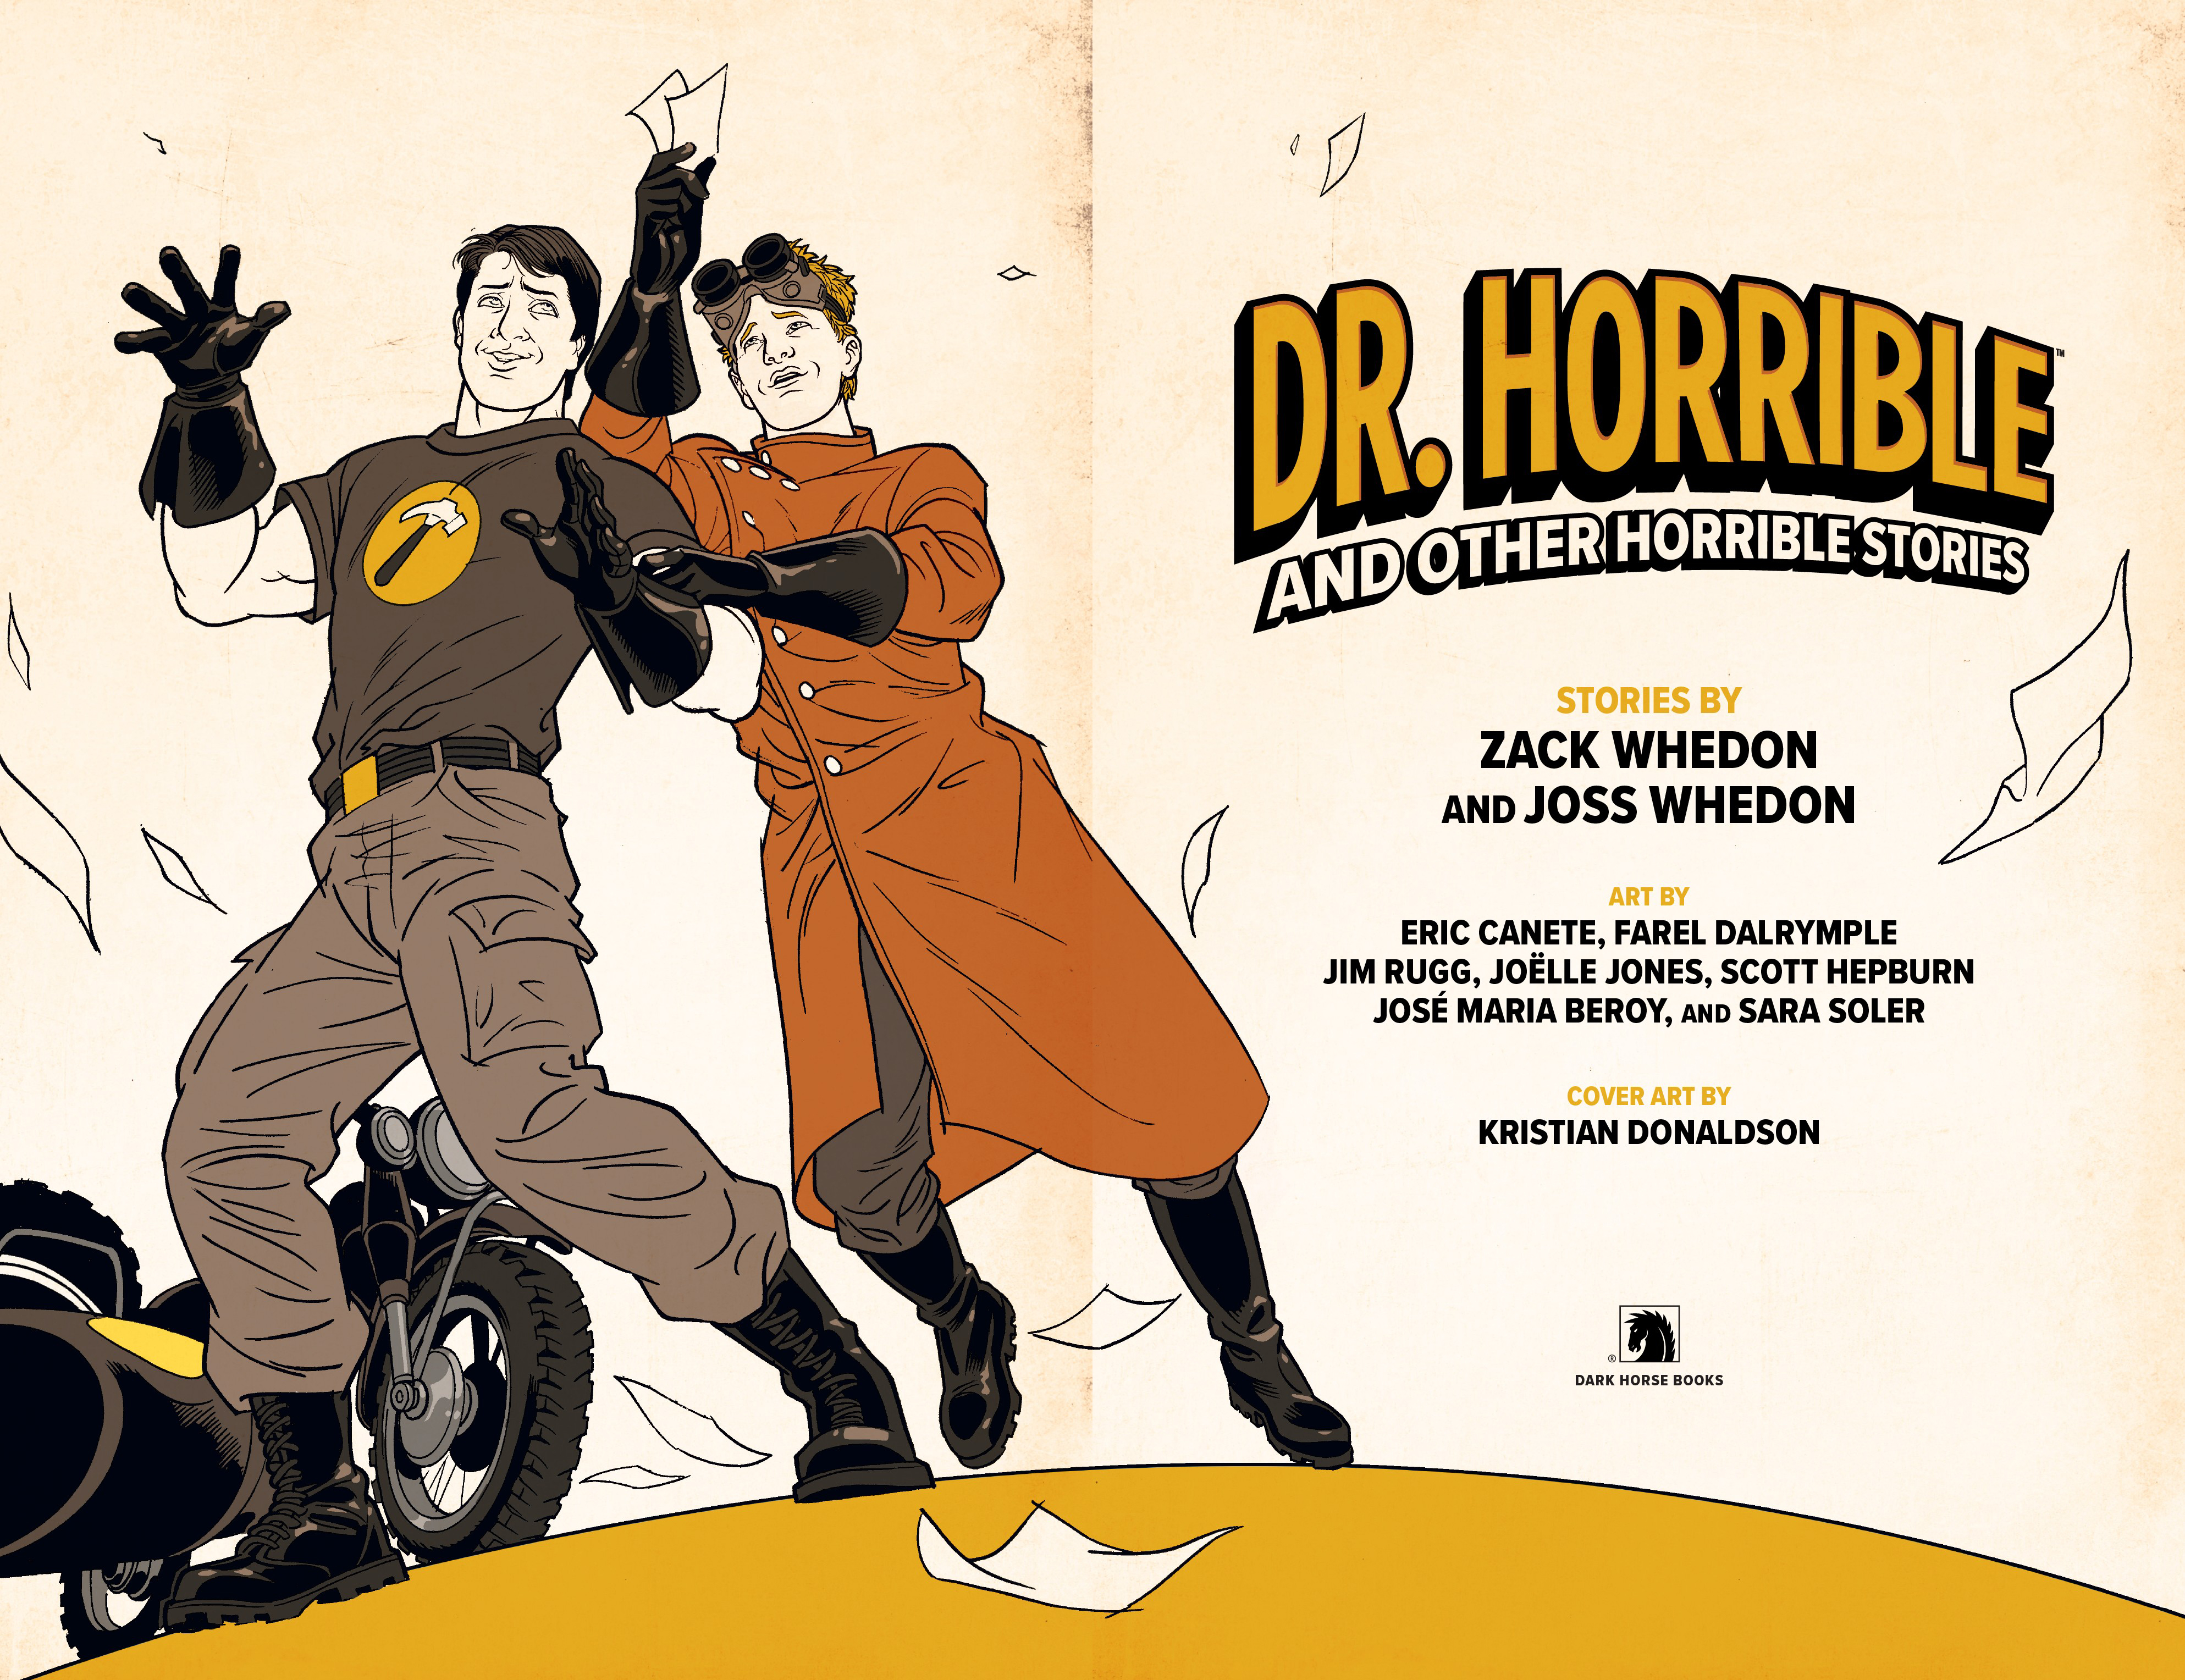 Read online Dr. Horrible and Other Horrible Stories comic -  Issue # TPB - 3